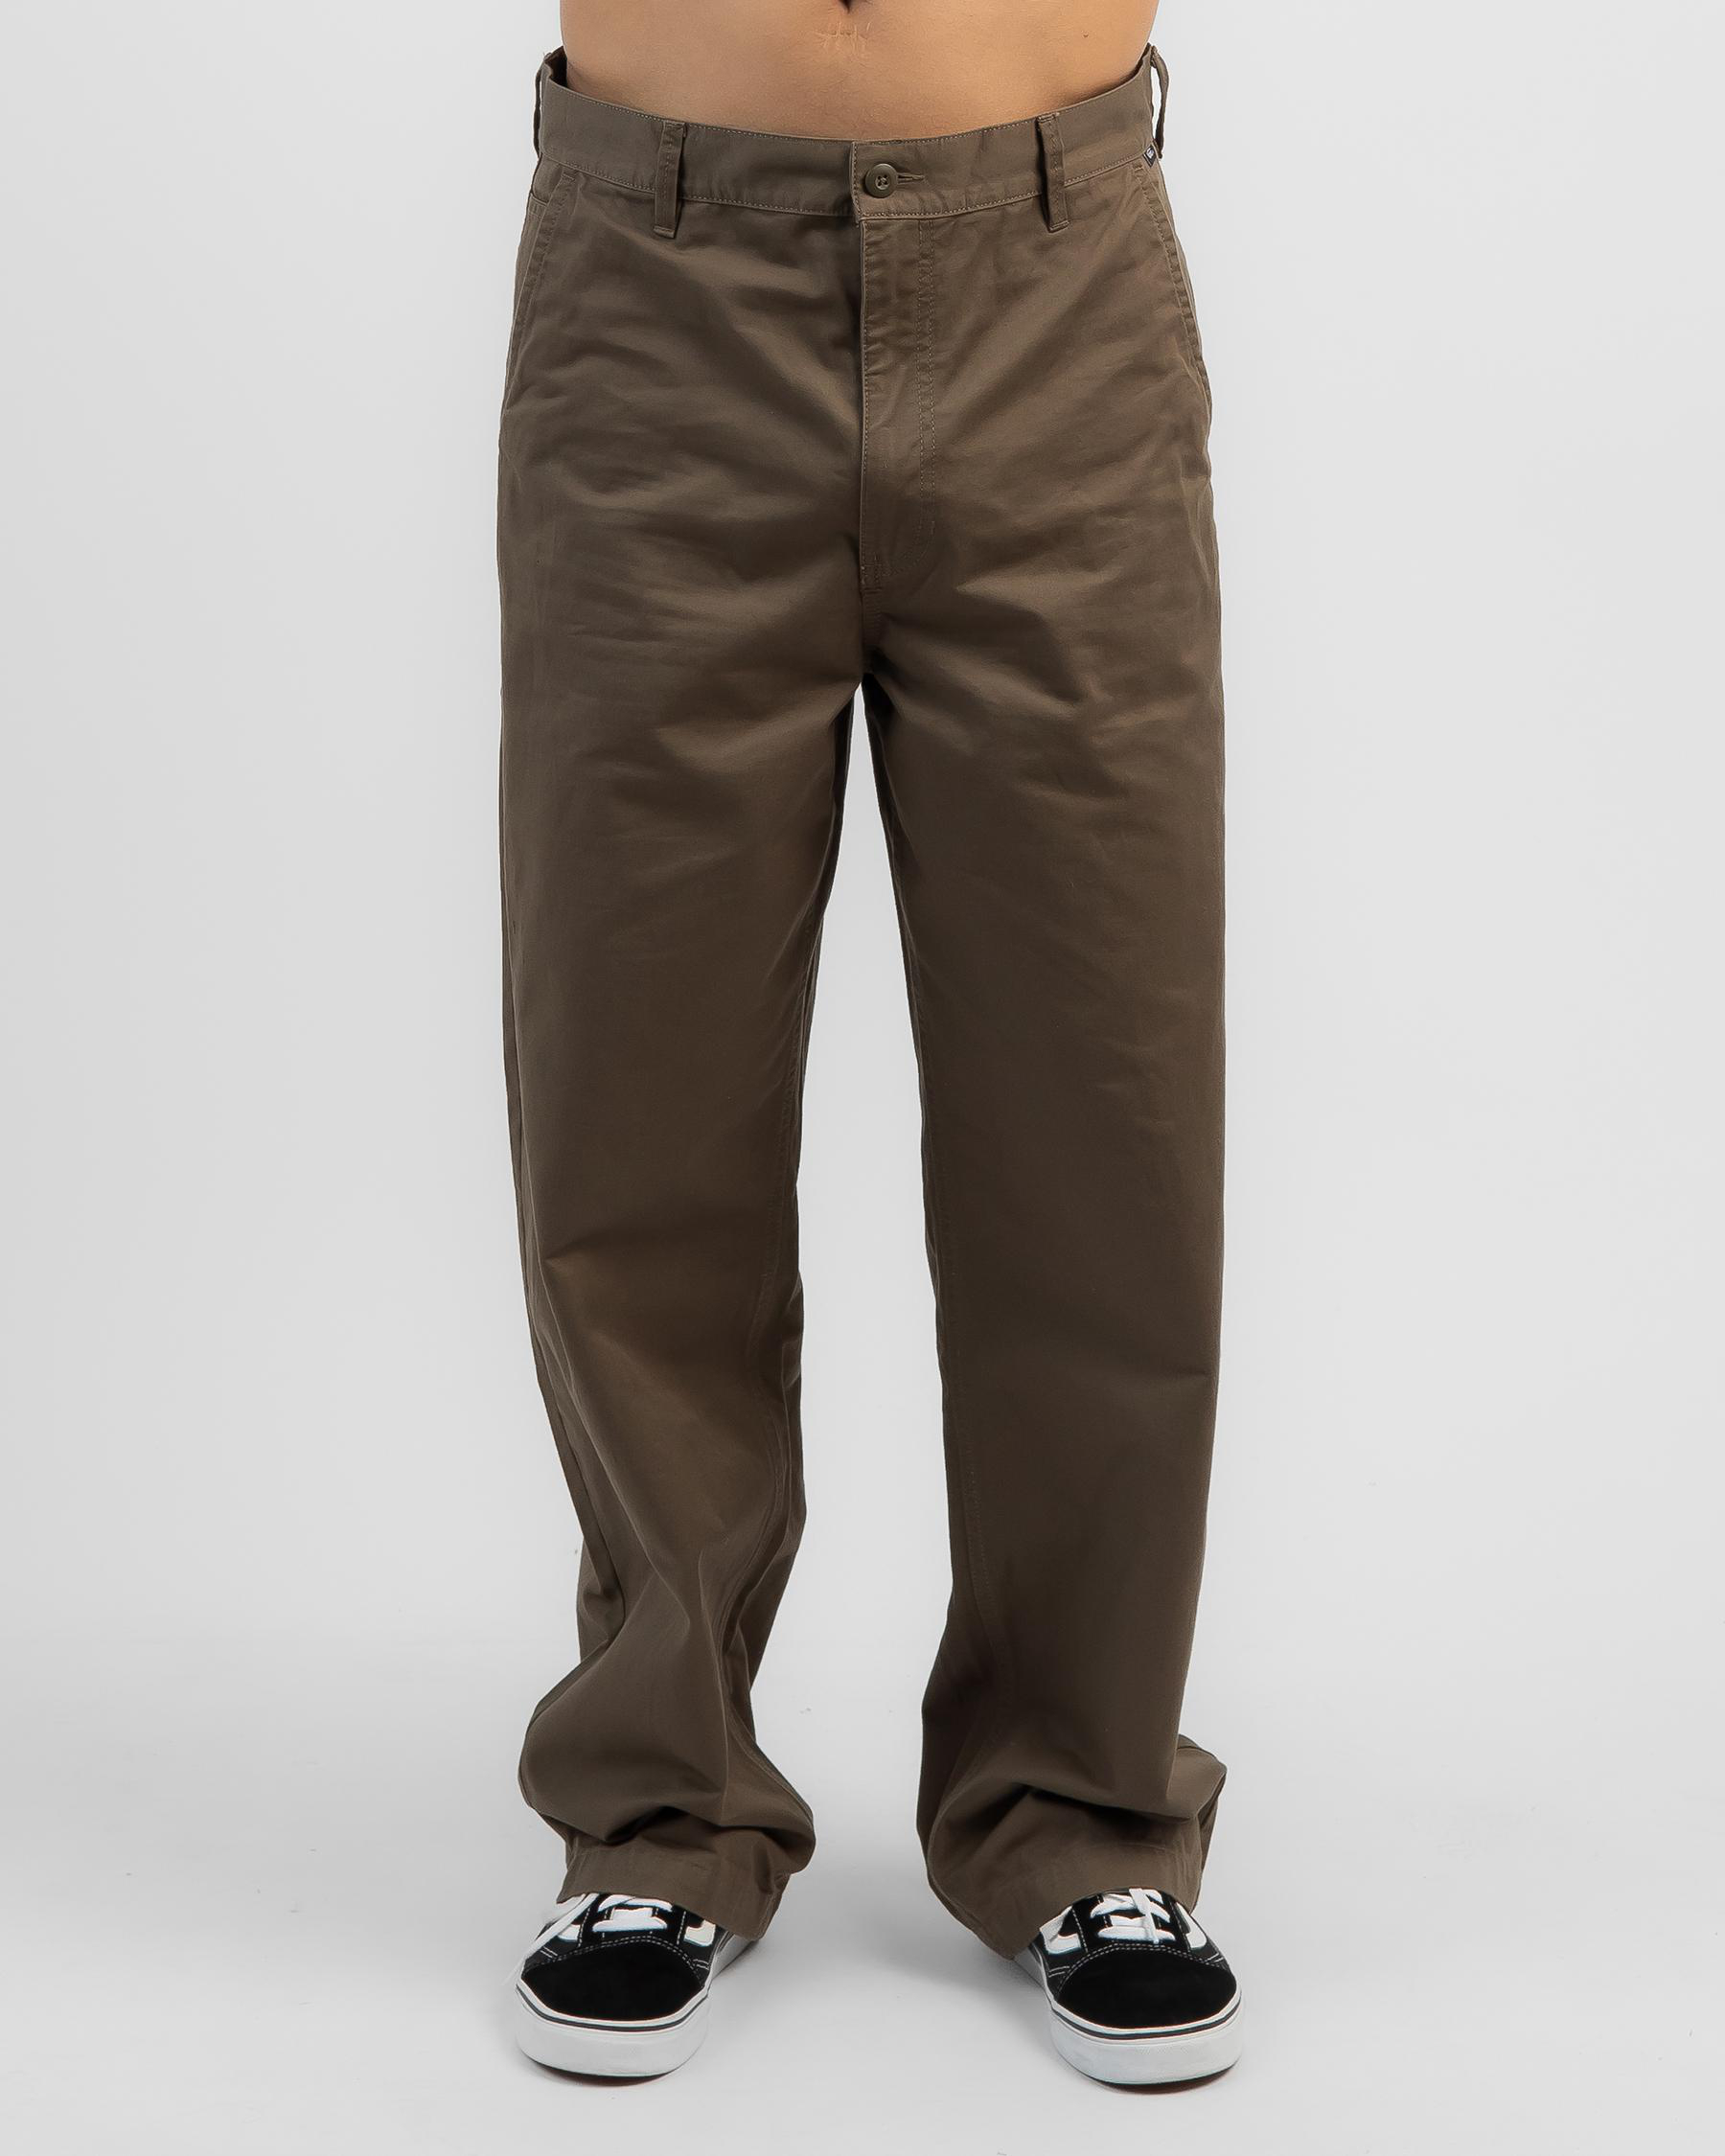 Vans Authentic Chino Baggy Pants In Canteen - Fast Shipping & Easy ...